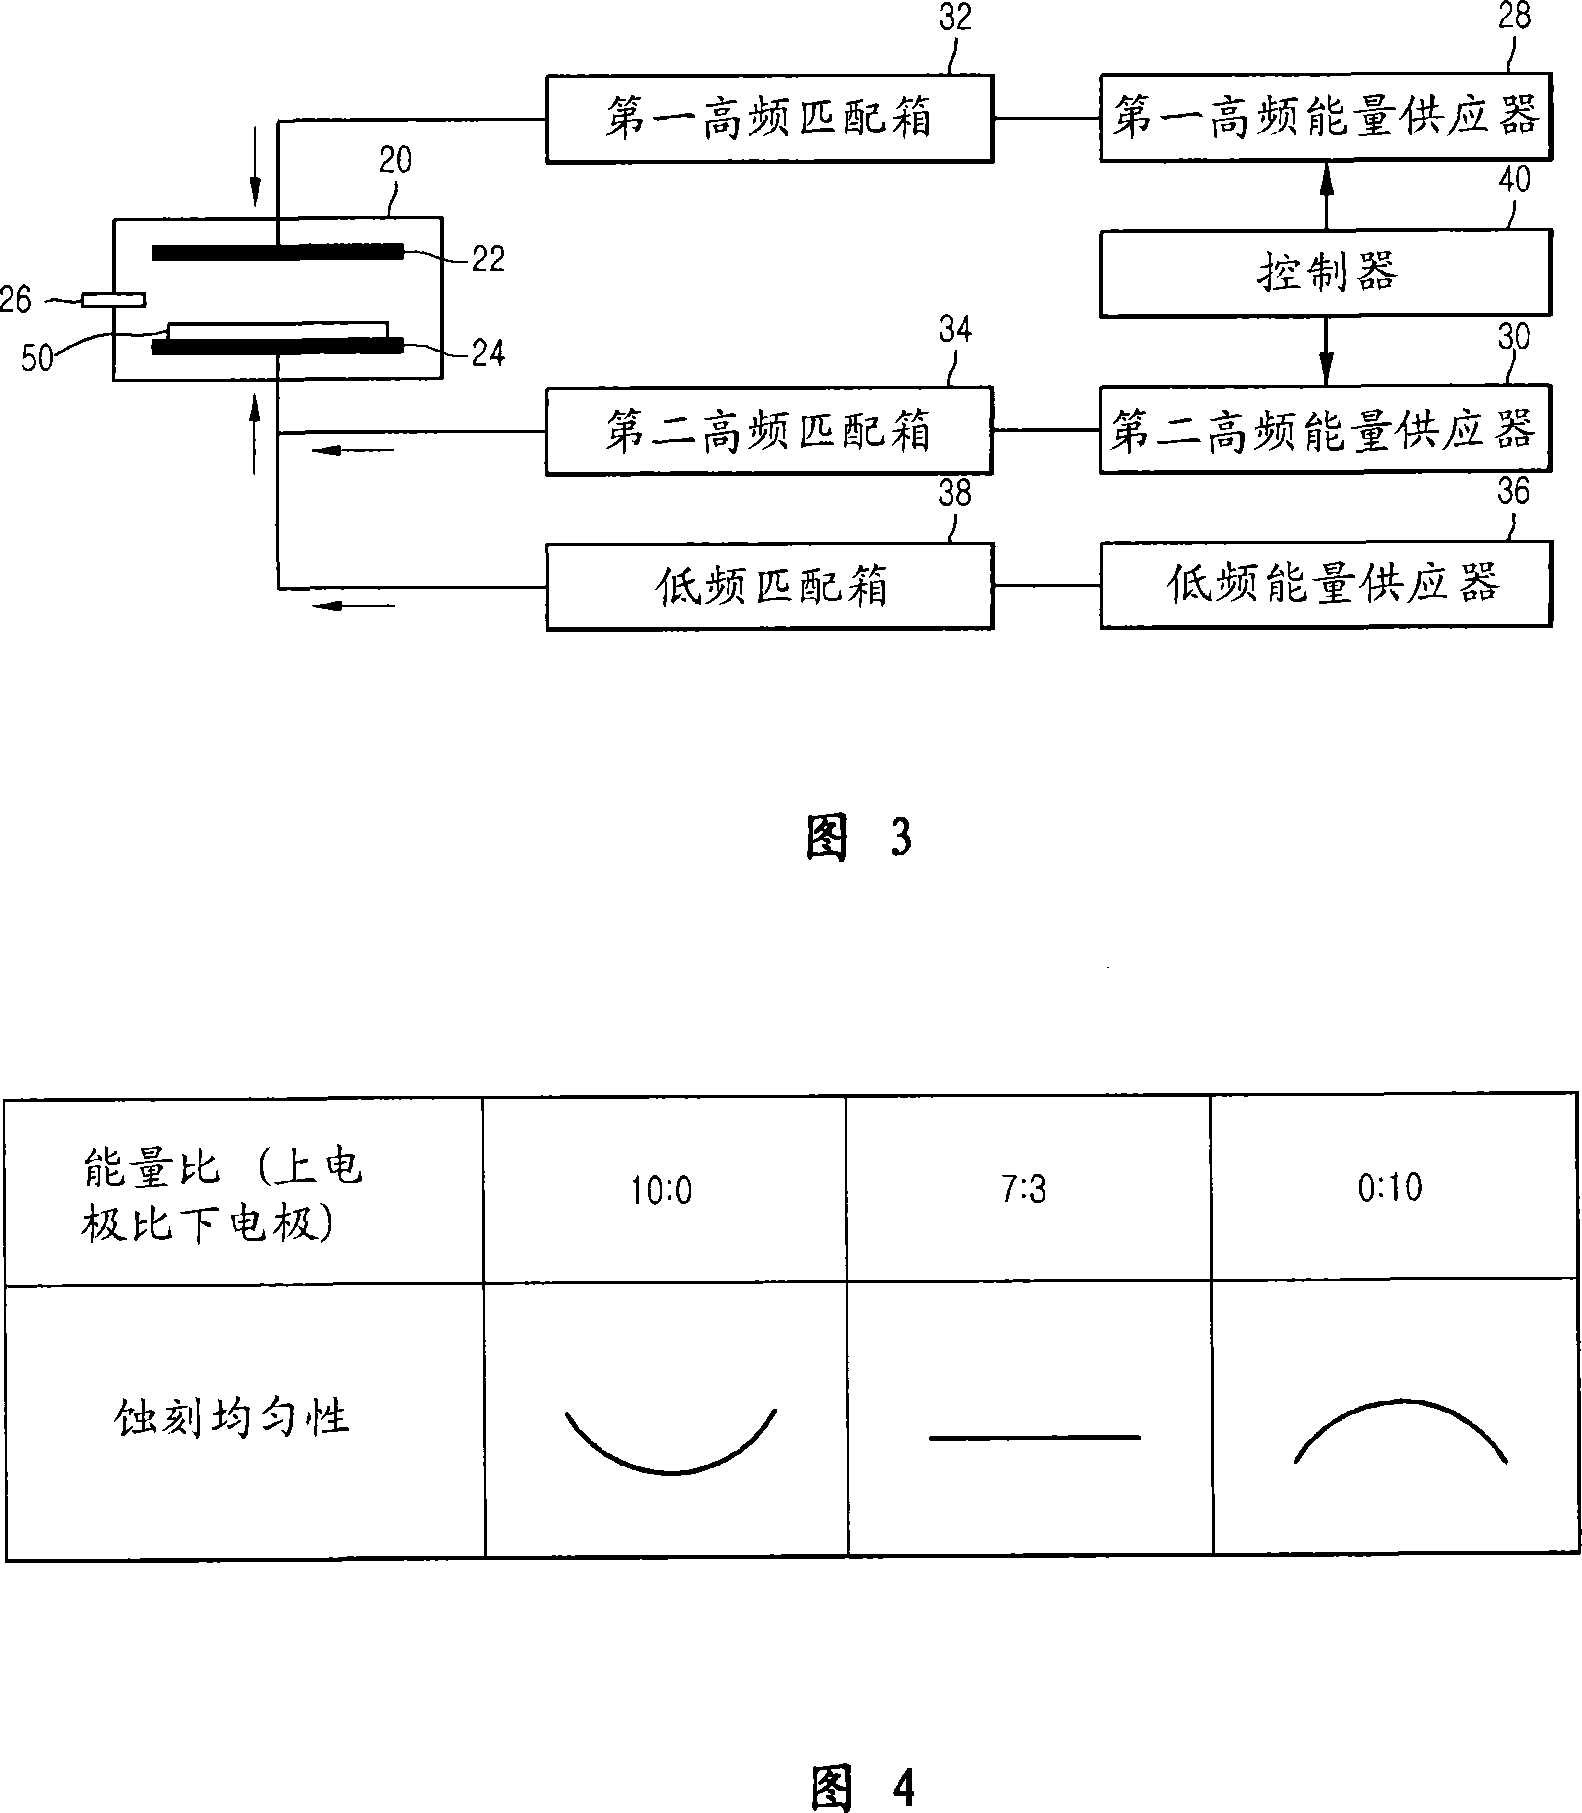 Semiconductor substrate processing apparatus, method, and medium